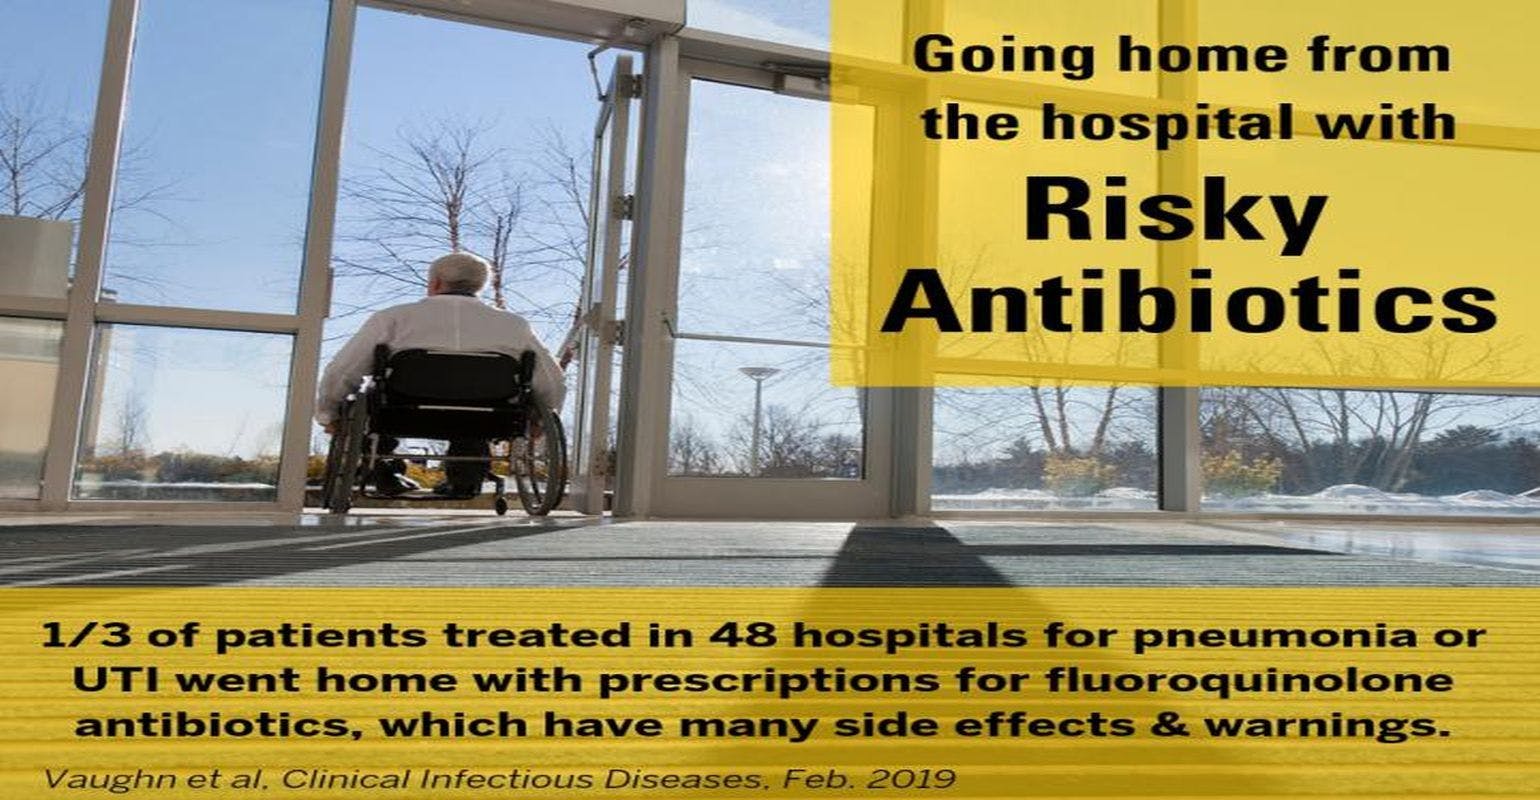 Even as Hospitals Cut Risky Antibiotic Use In-House, Patients Often Go Home With Them